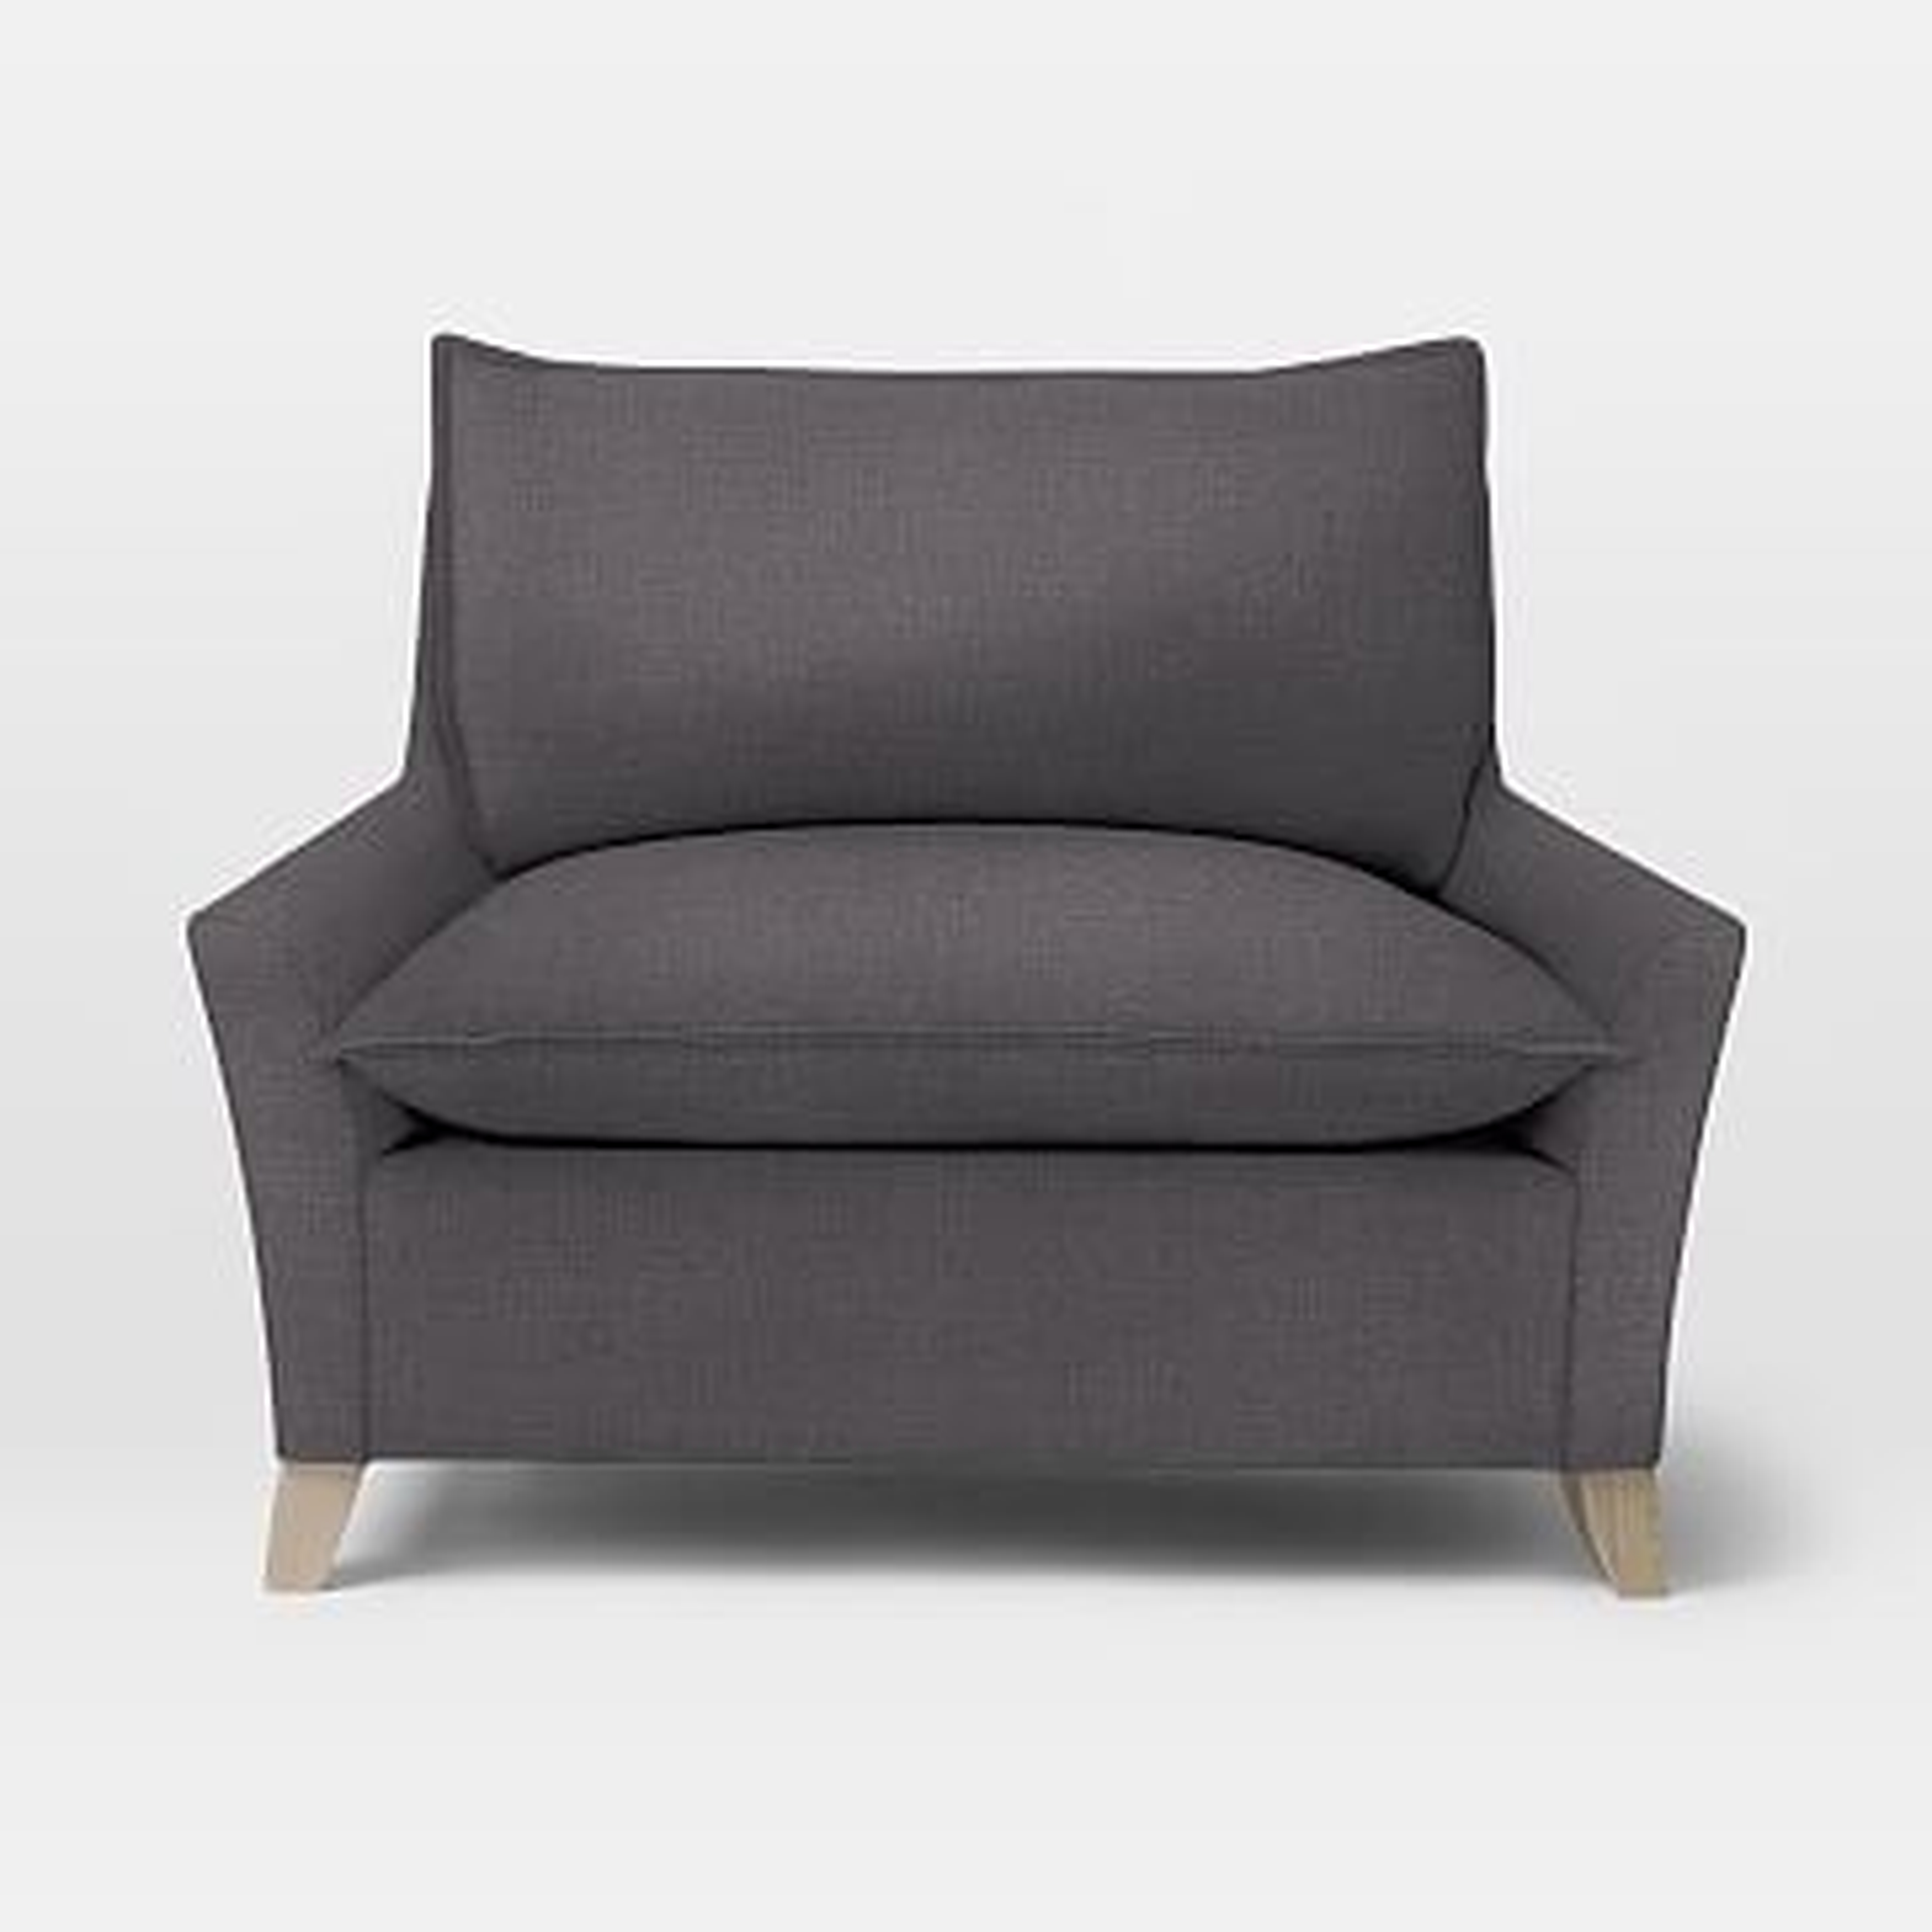 Bliss Down-Filled Chair-and-a-Half, Linen Weave, Steel Gray - West Elm